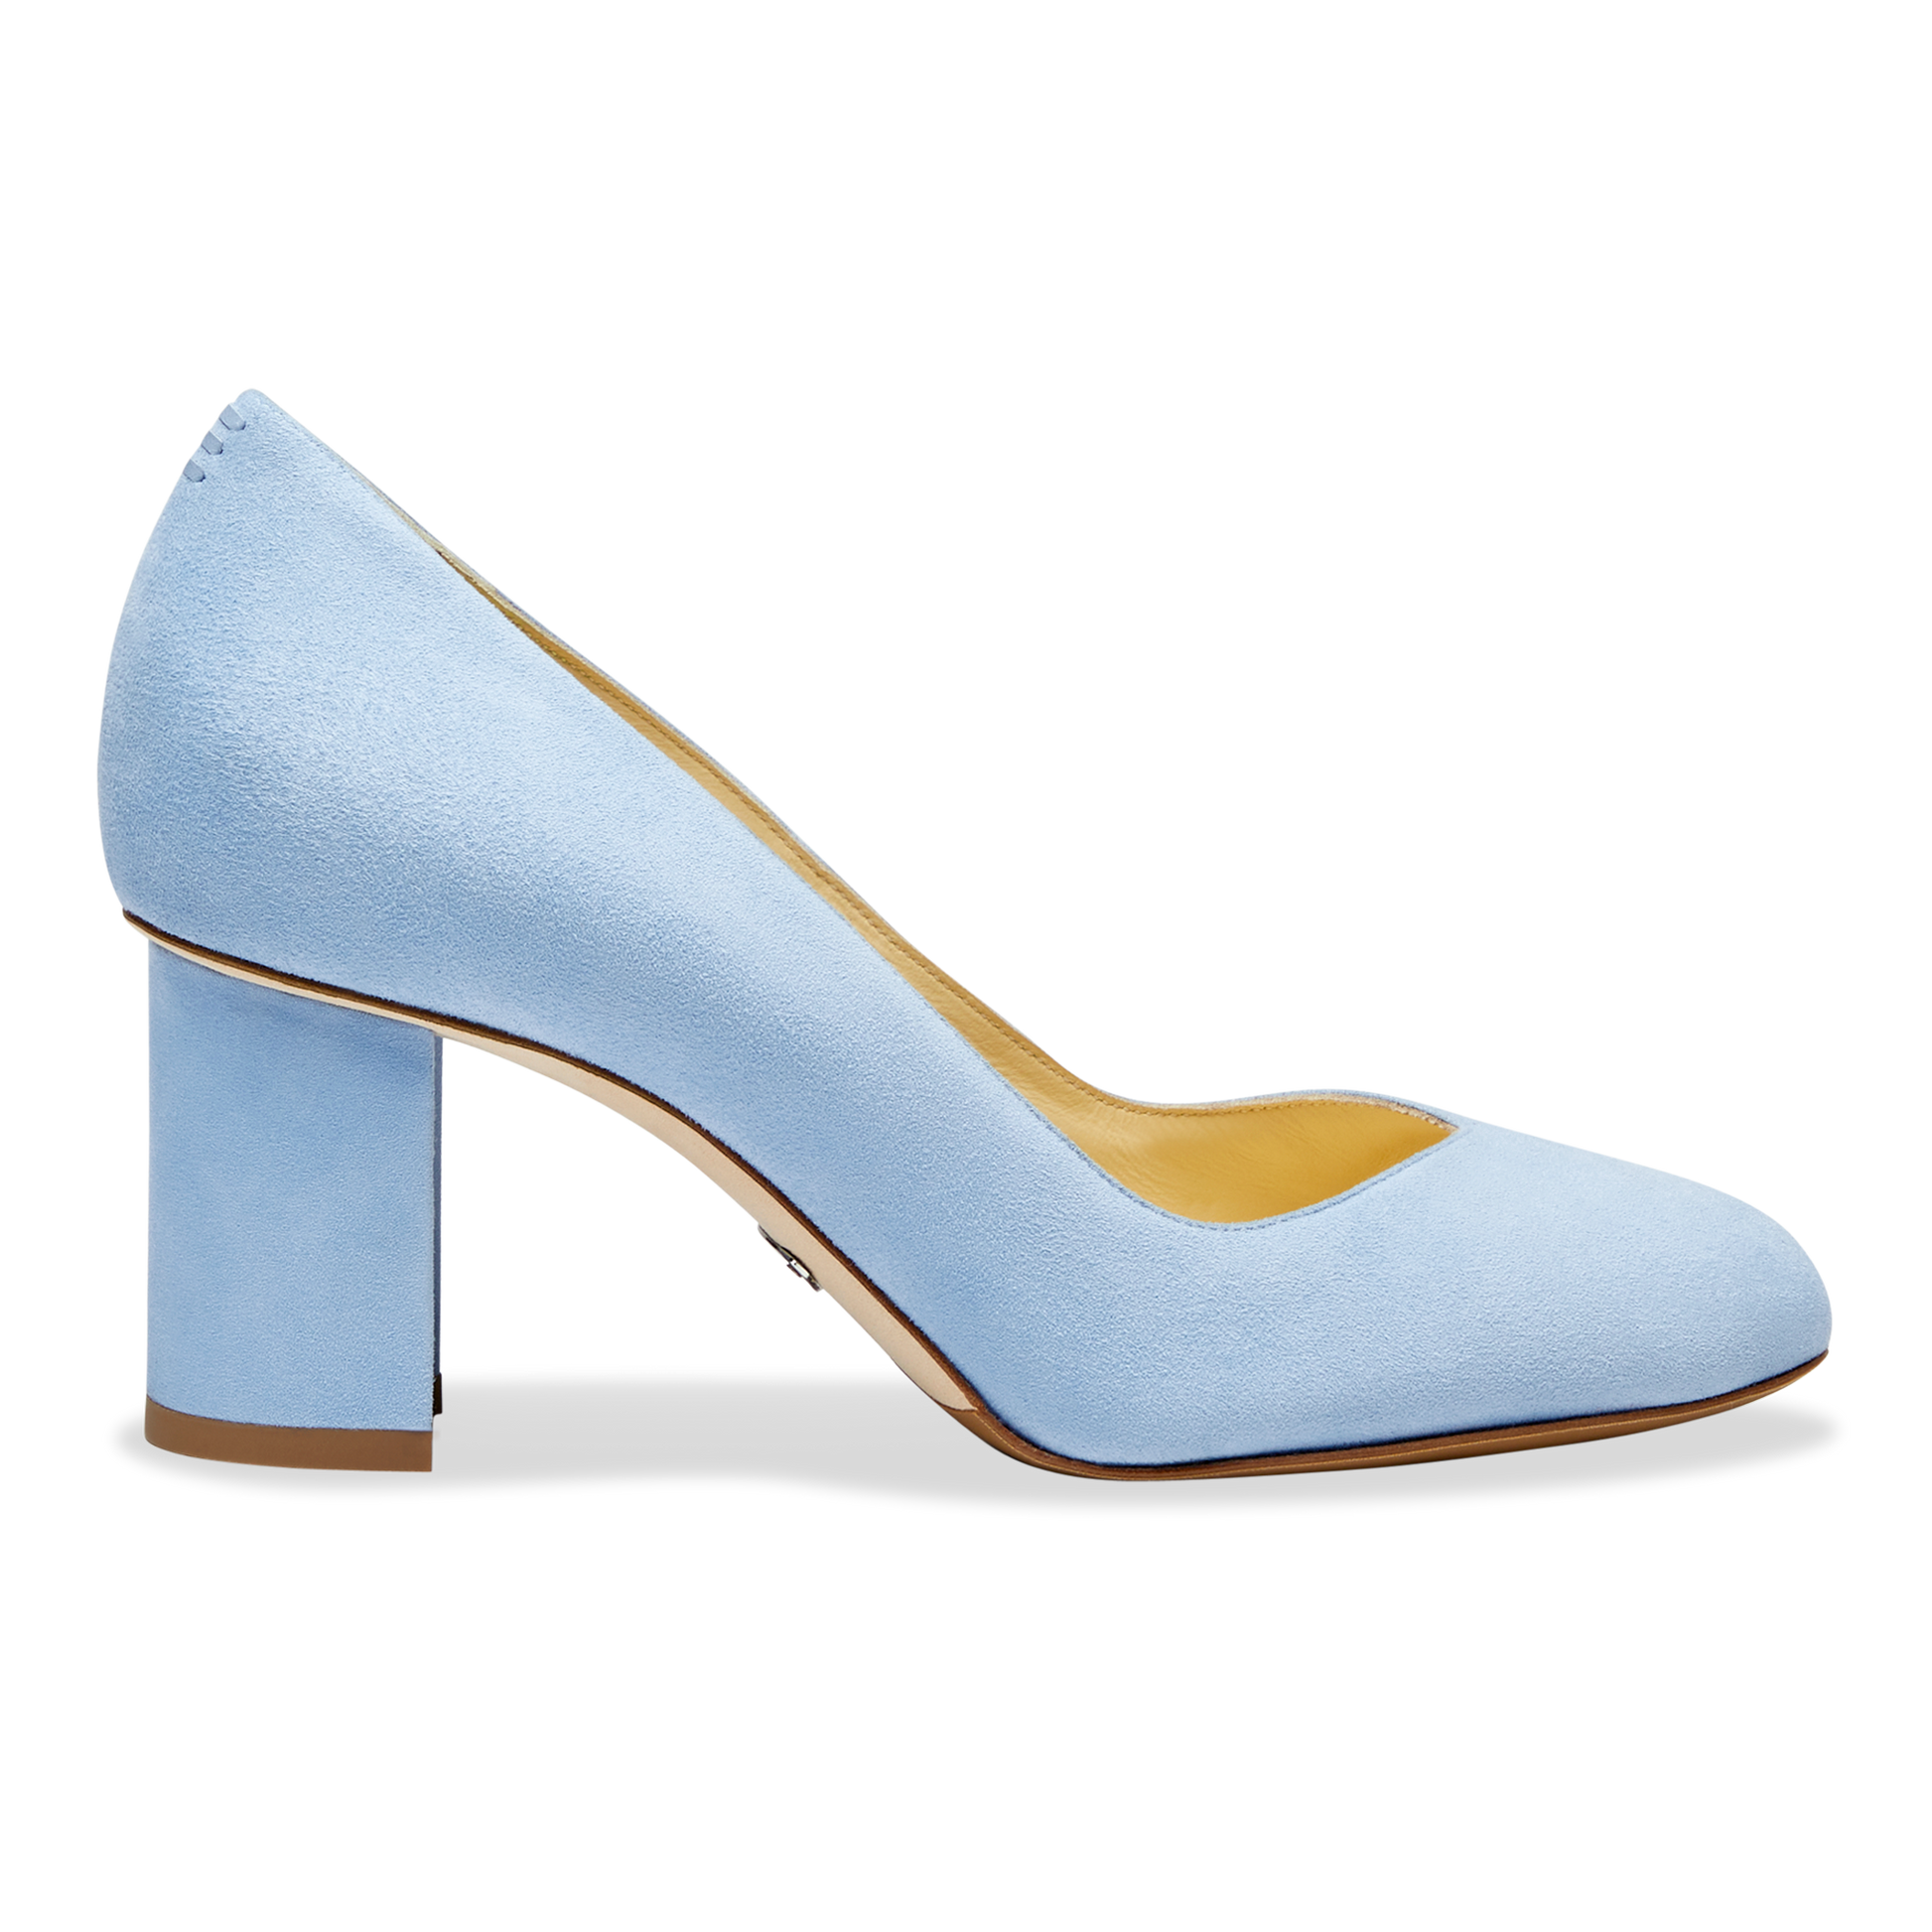 Perfect Round Toe Pump in Cornflower Blue Suede Handcrafted in Italy